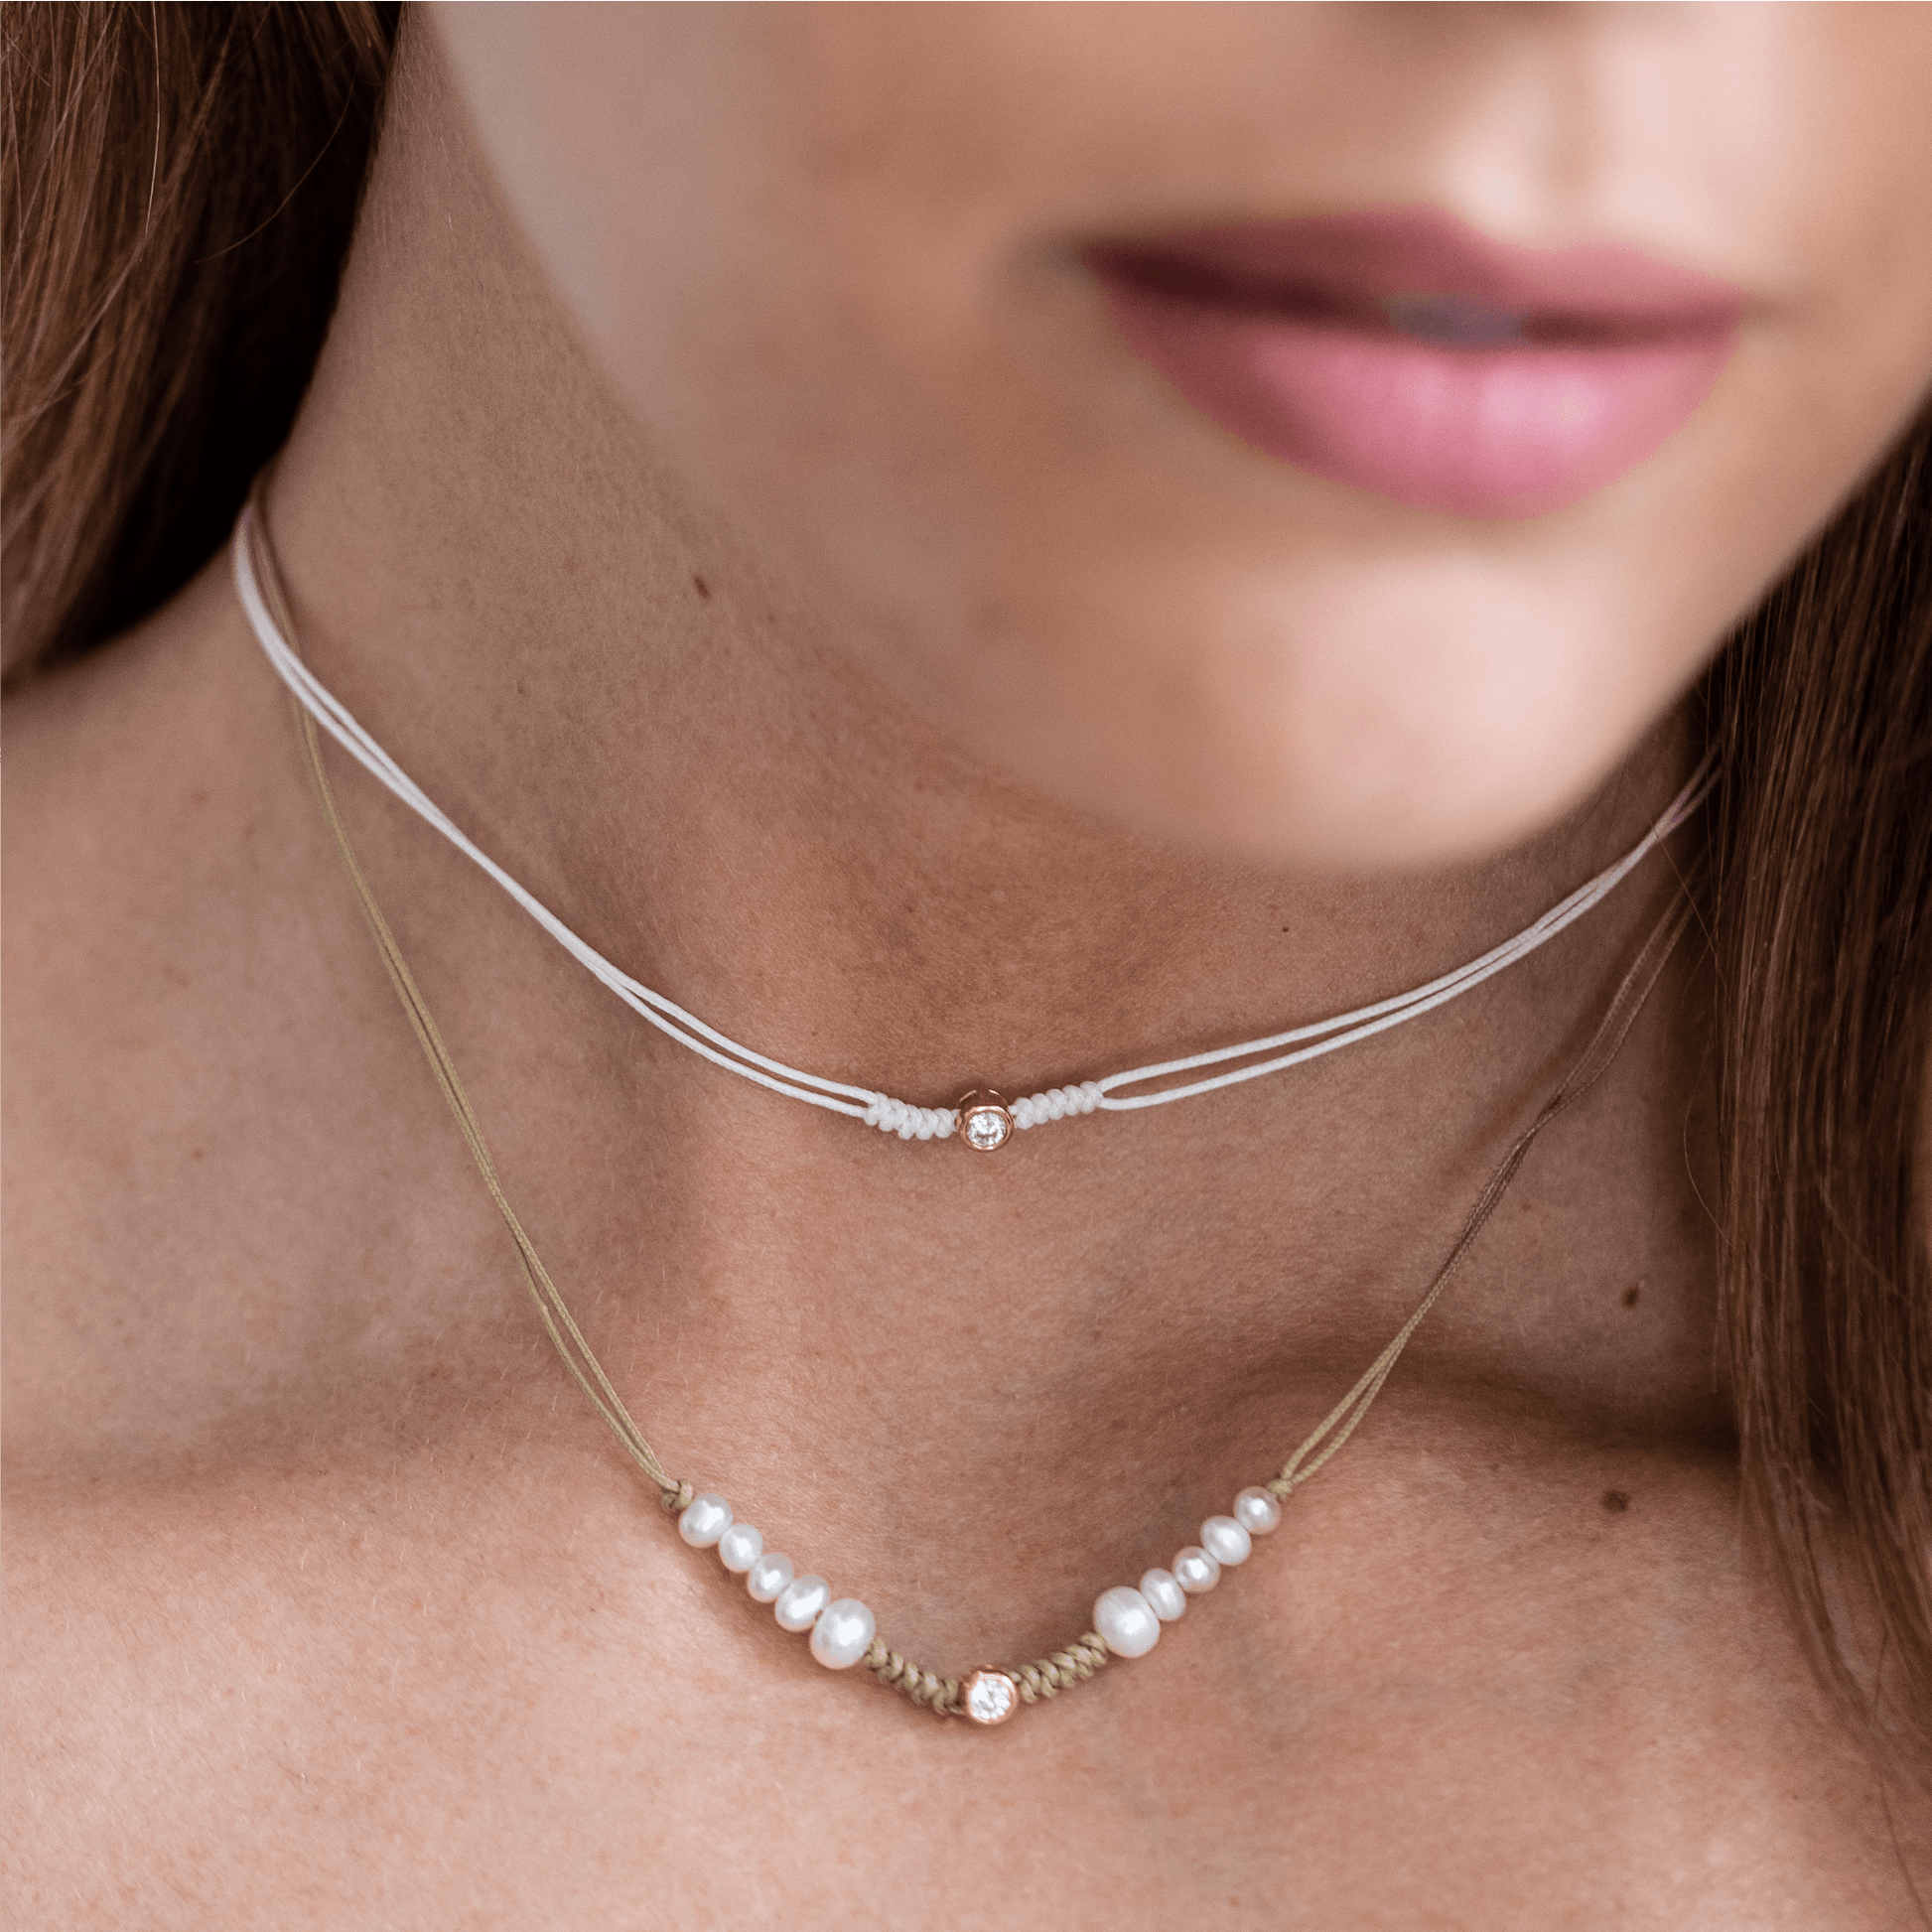 Ten Natural Pearl String of Love Necklace - 14K Rose Gold Necklaces 14K Solid Gold 